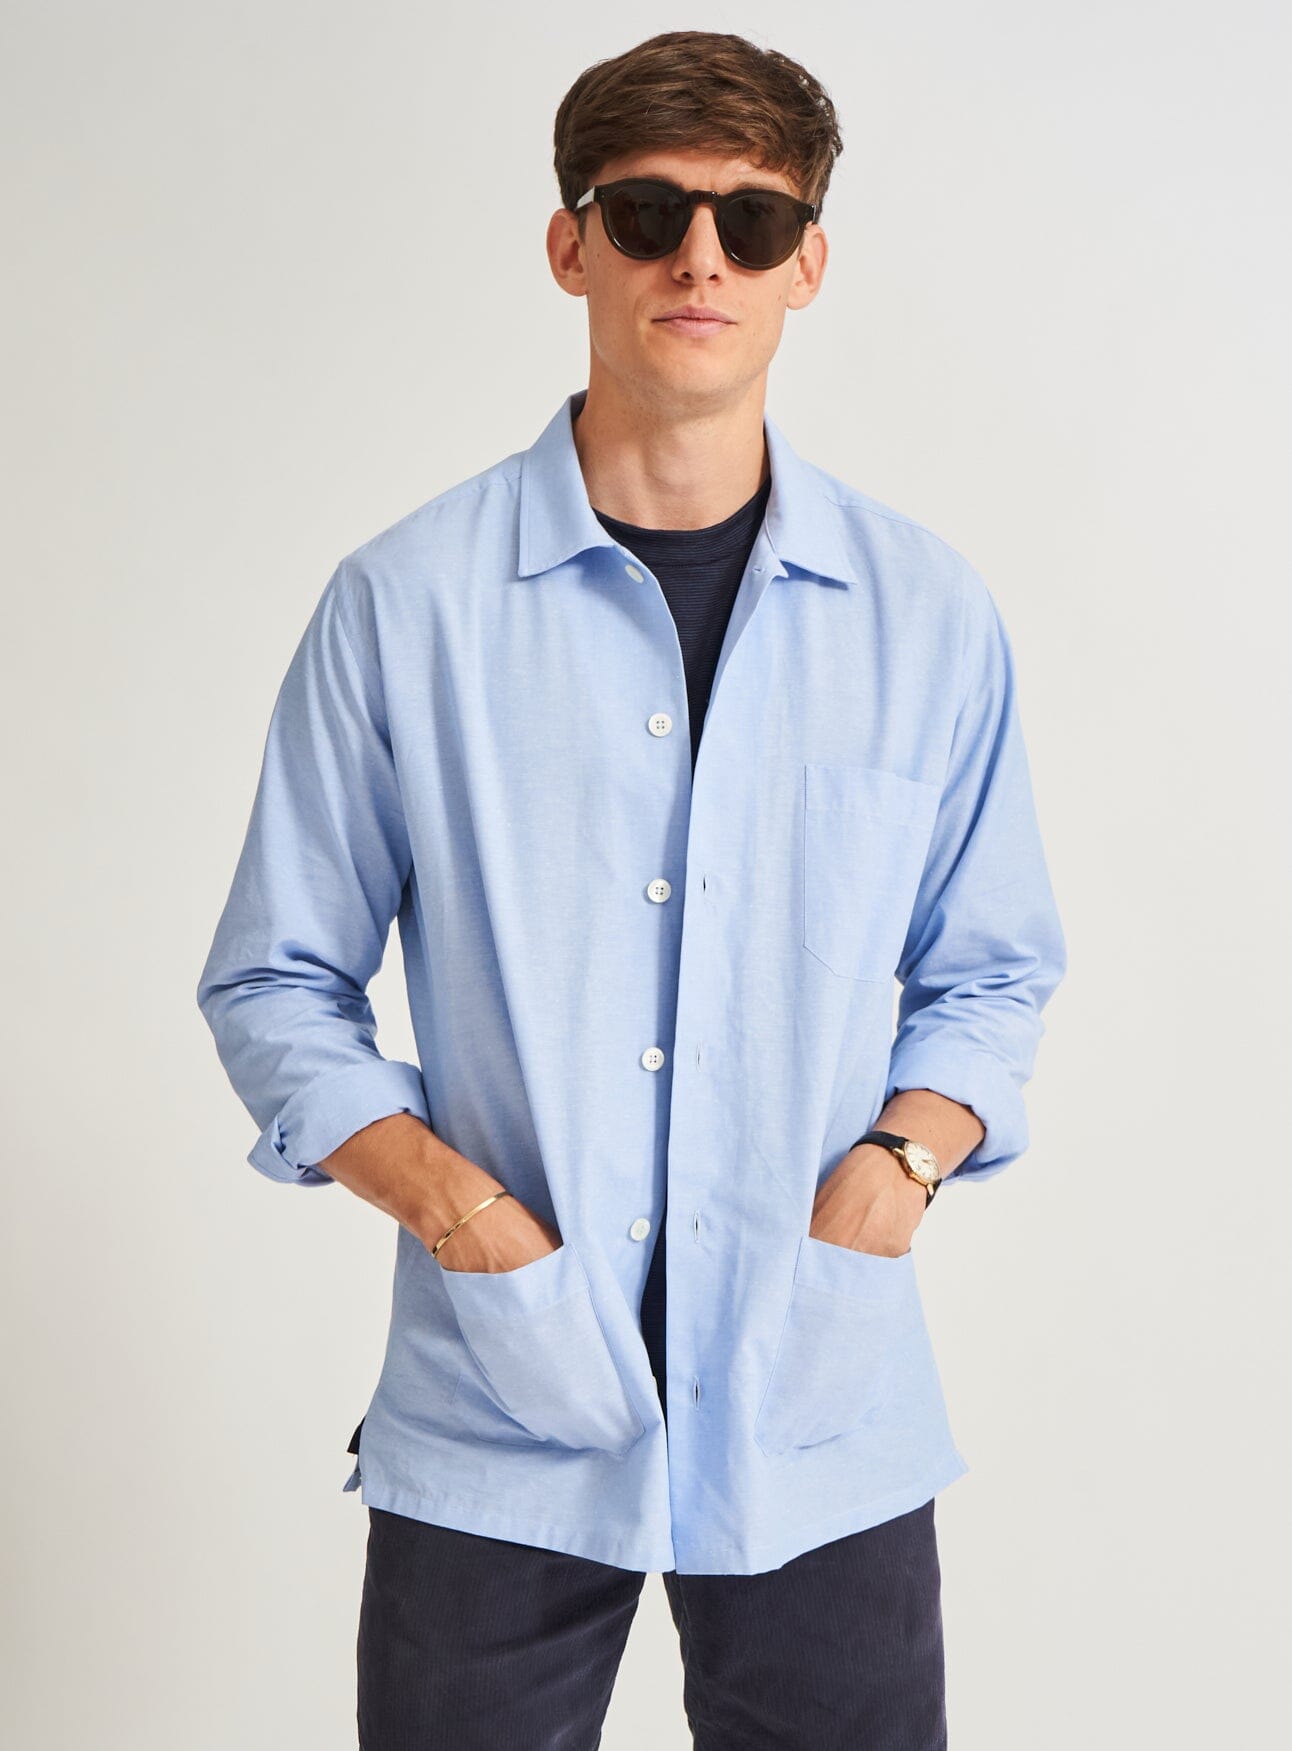 sustainable clothing, essentials shirt